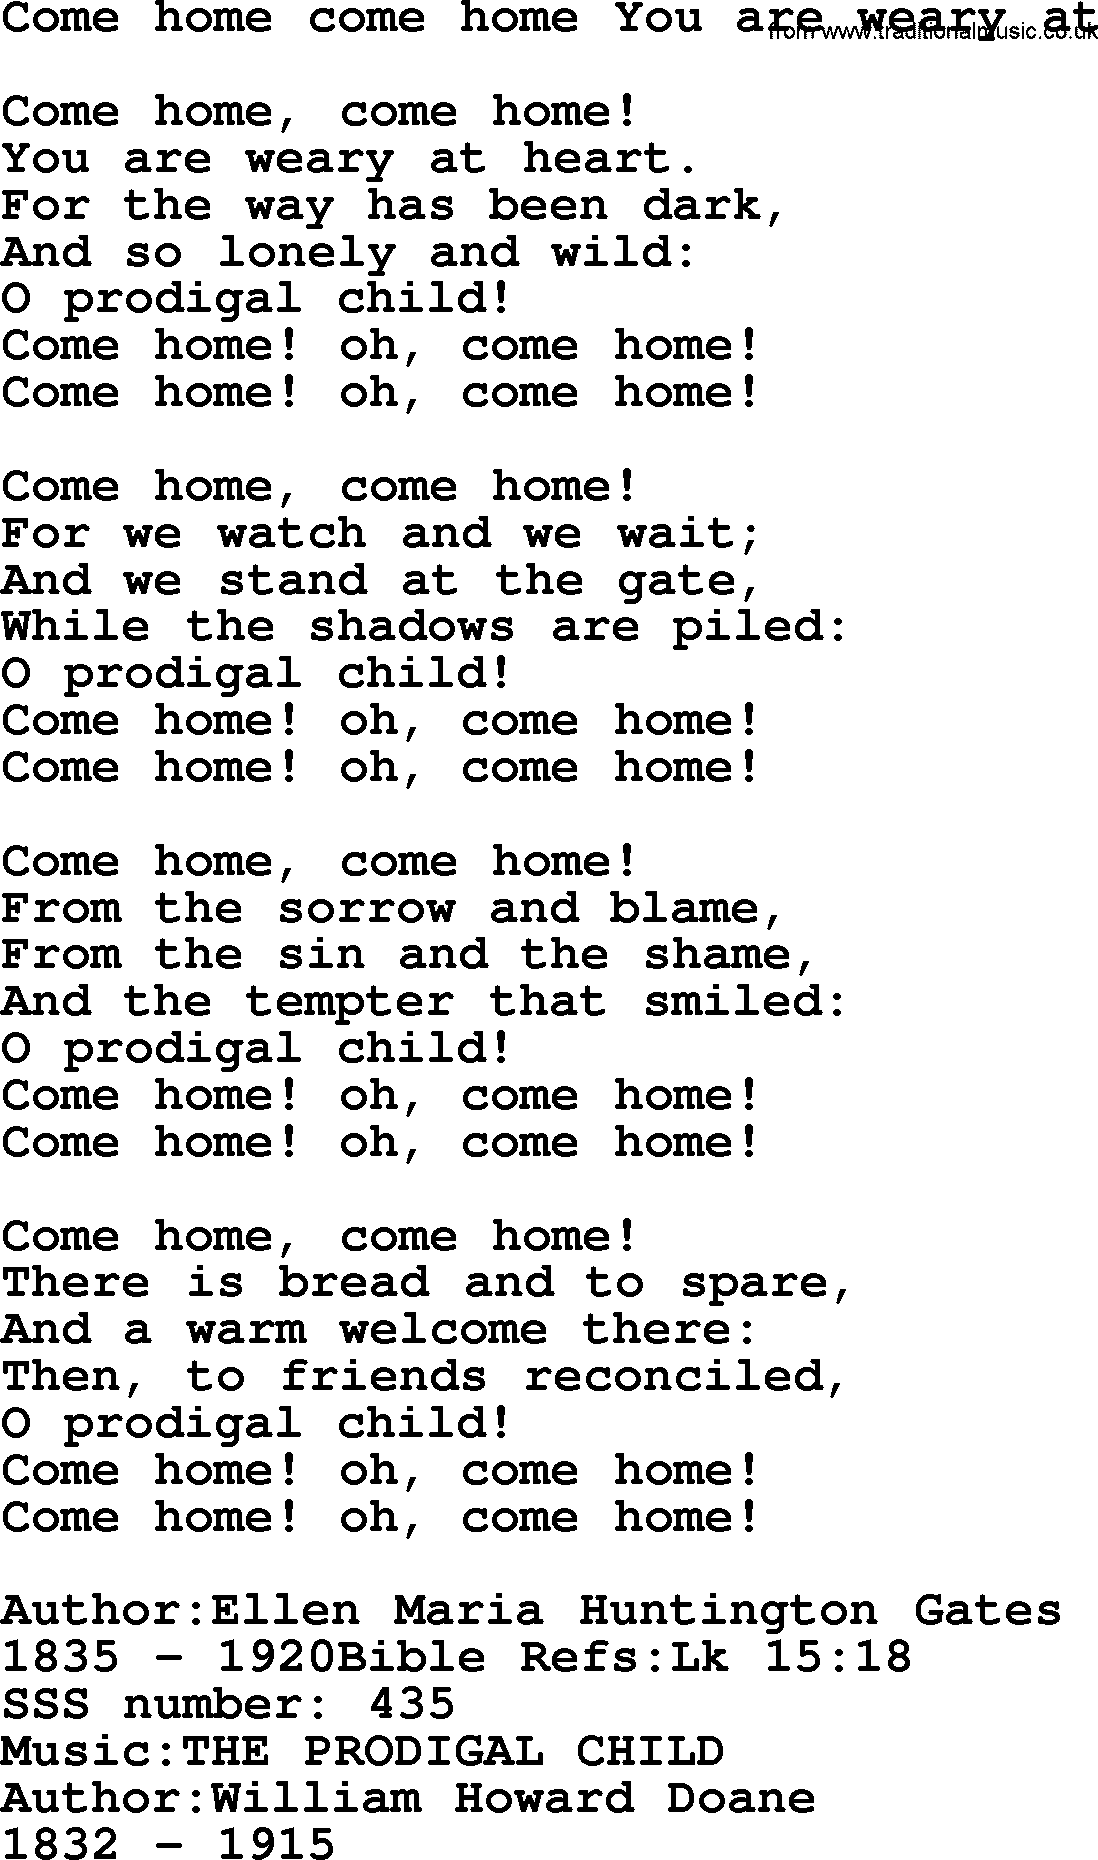 Sacred Songs and Solos complete, 1200 Hymns, title: Come Home Come Home You Are Weary At, lyrics and PDF